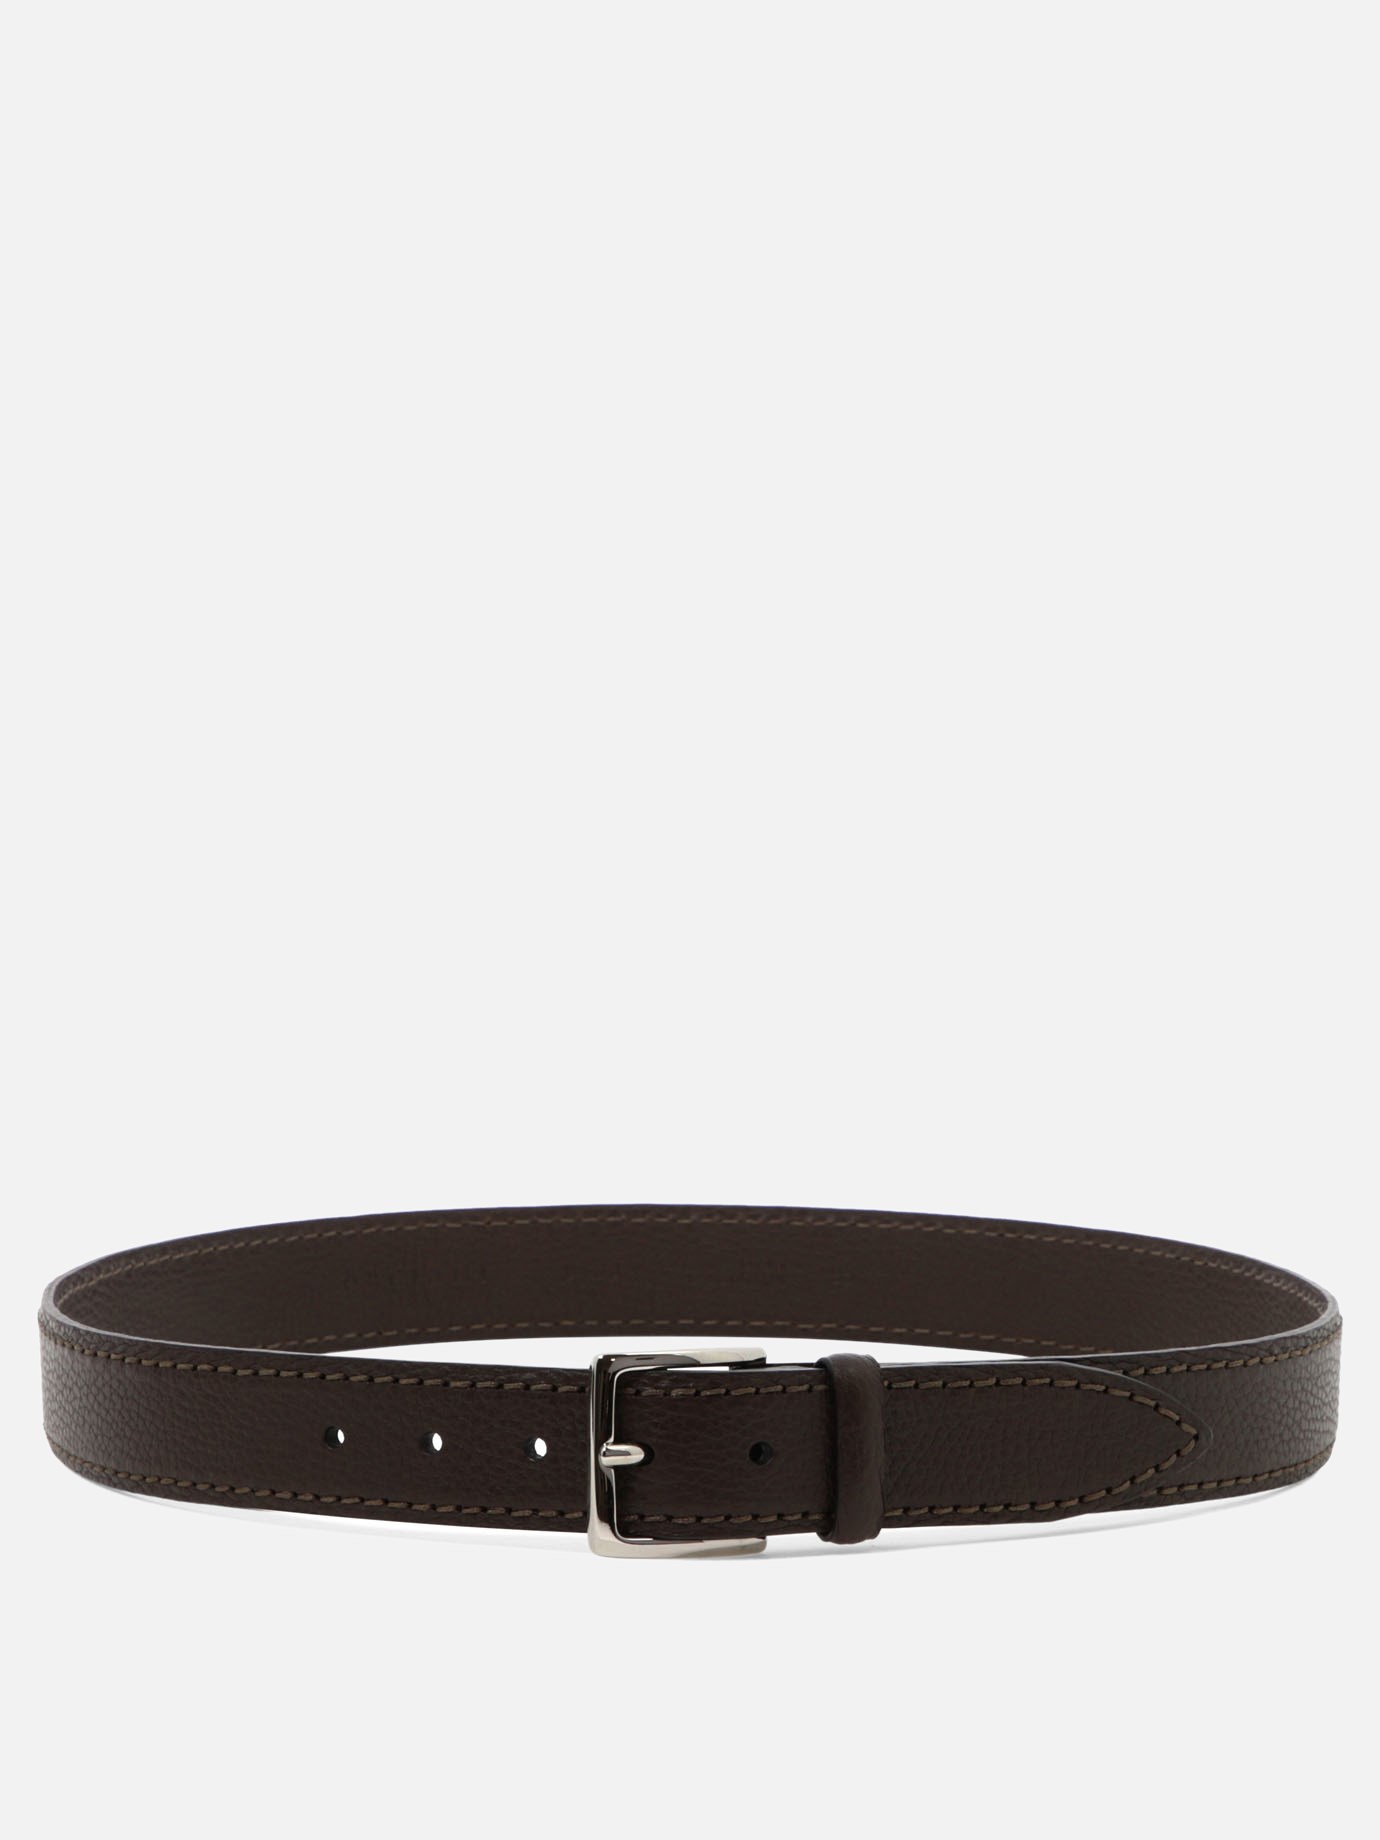 Dollar leather beltby Orciani - 5